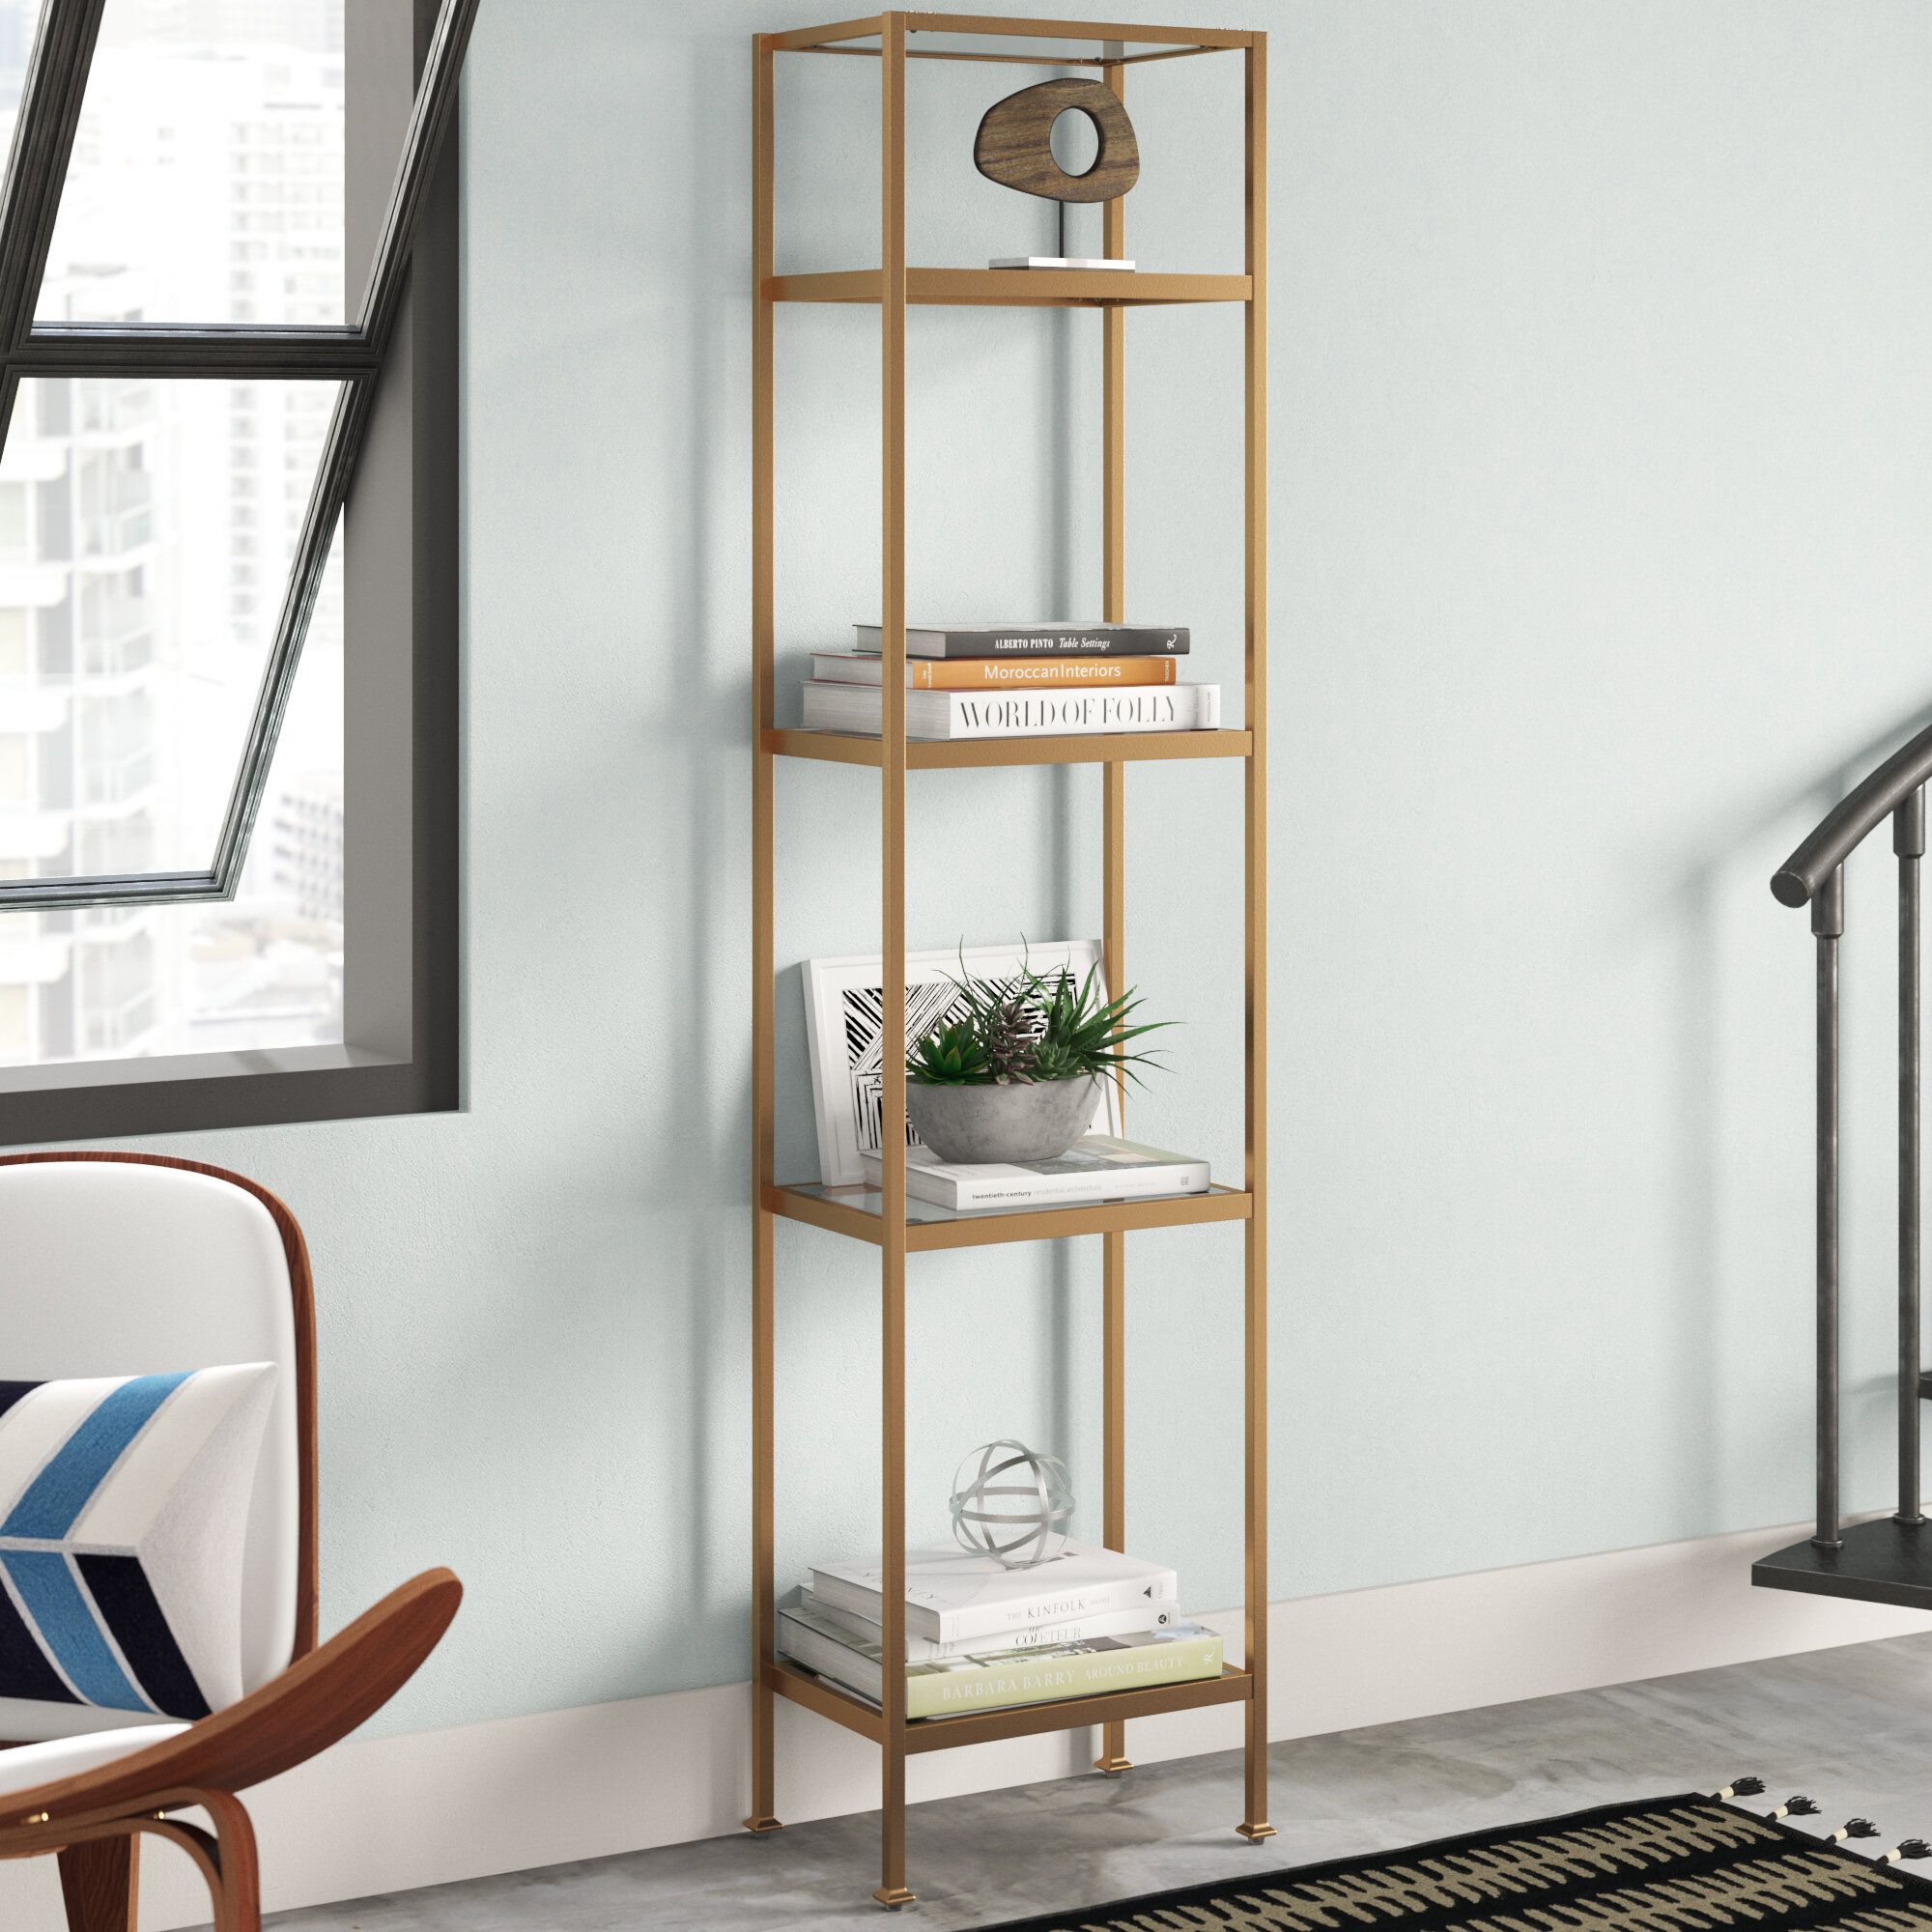 Three Posts™ Otha 73'' H X 18'' W Steel Etagere Bookcase & Reviews | Wayfair In Gold Bookcases (View 12 of 15)